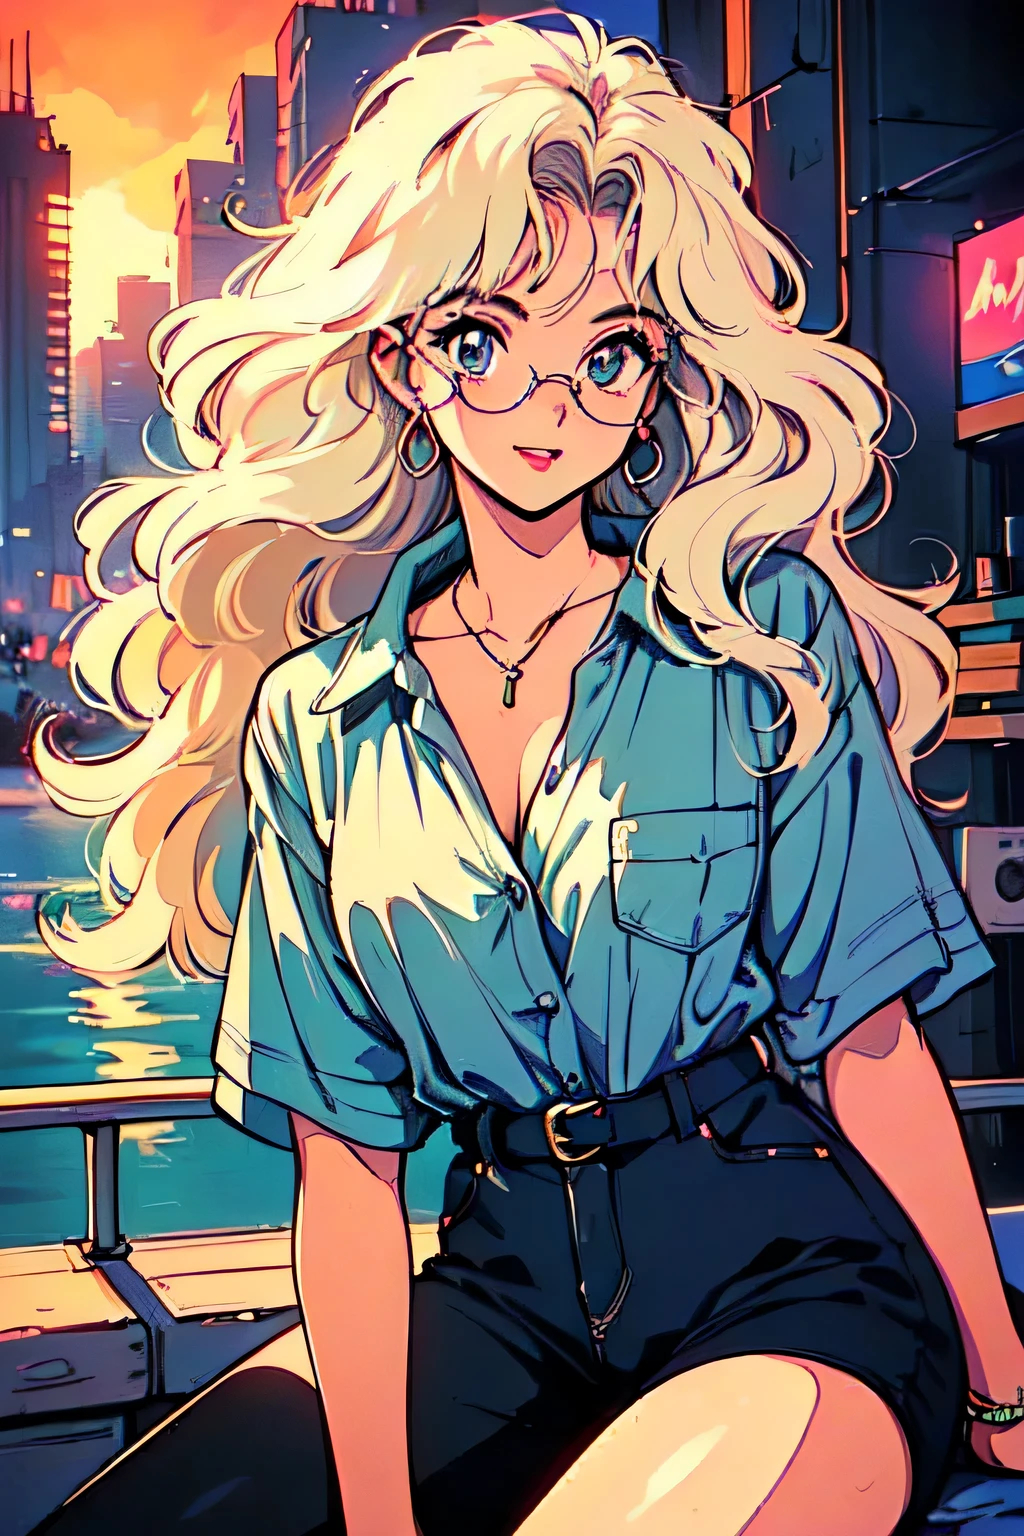 (80's, retro, city pop:1.5), (album cover), (masterpiece, best quality, intricate detail), (anime, illustration), (pastel colors:1.3), best photo pose, dynamic angle,
girl, solo, smile, perfect detail eyes, delicate face, big glasses, long blonde hair, curly hair
City Scenes, night city, tokyo, high fashion, 